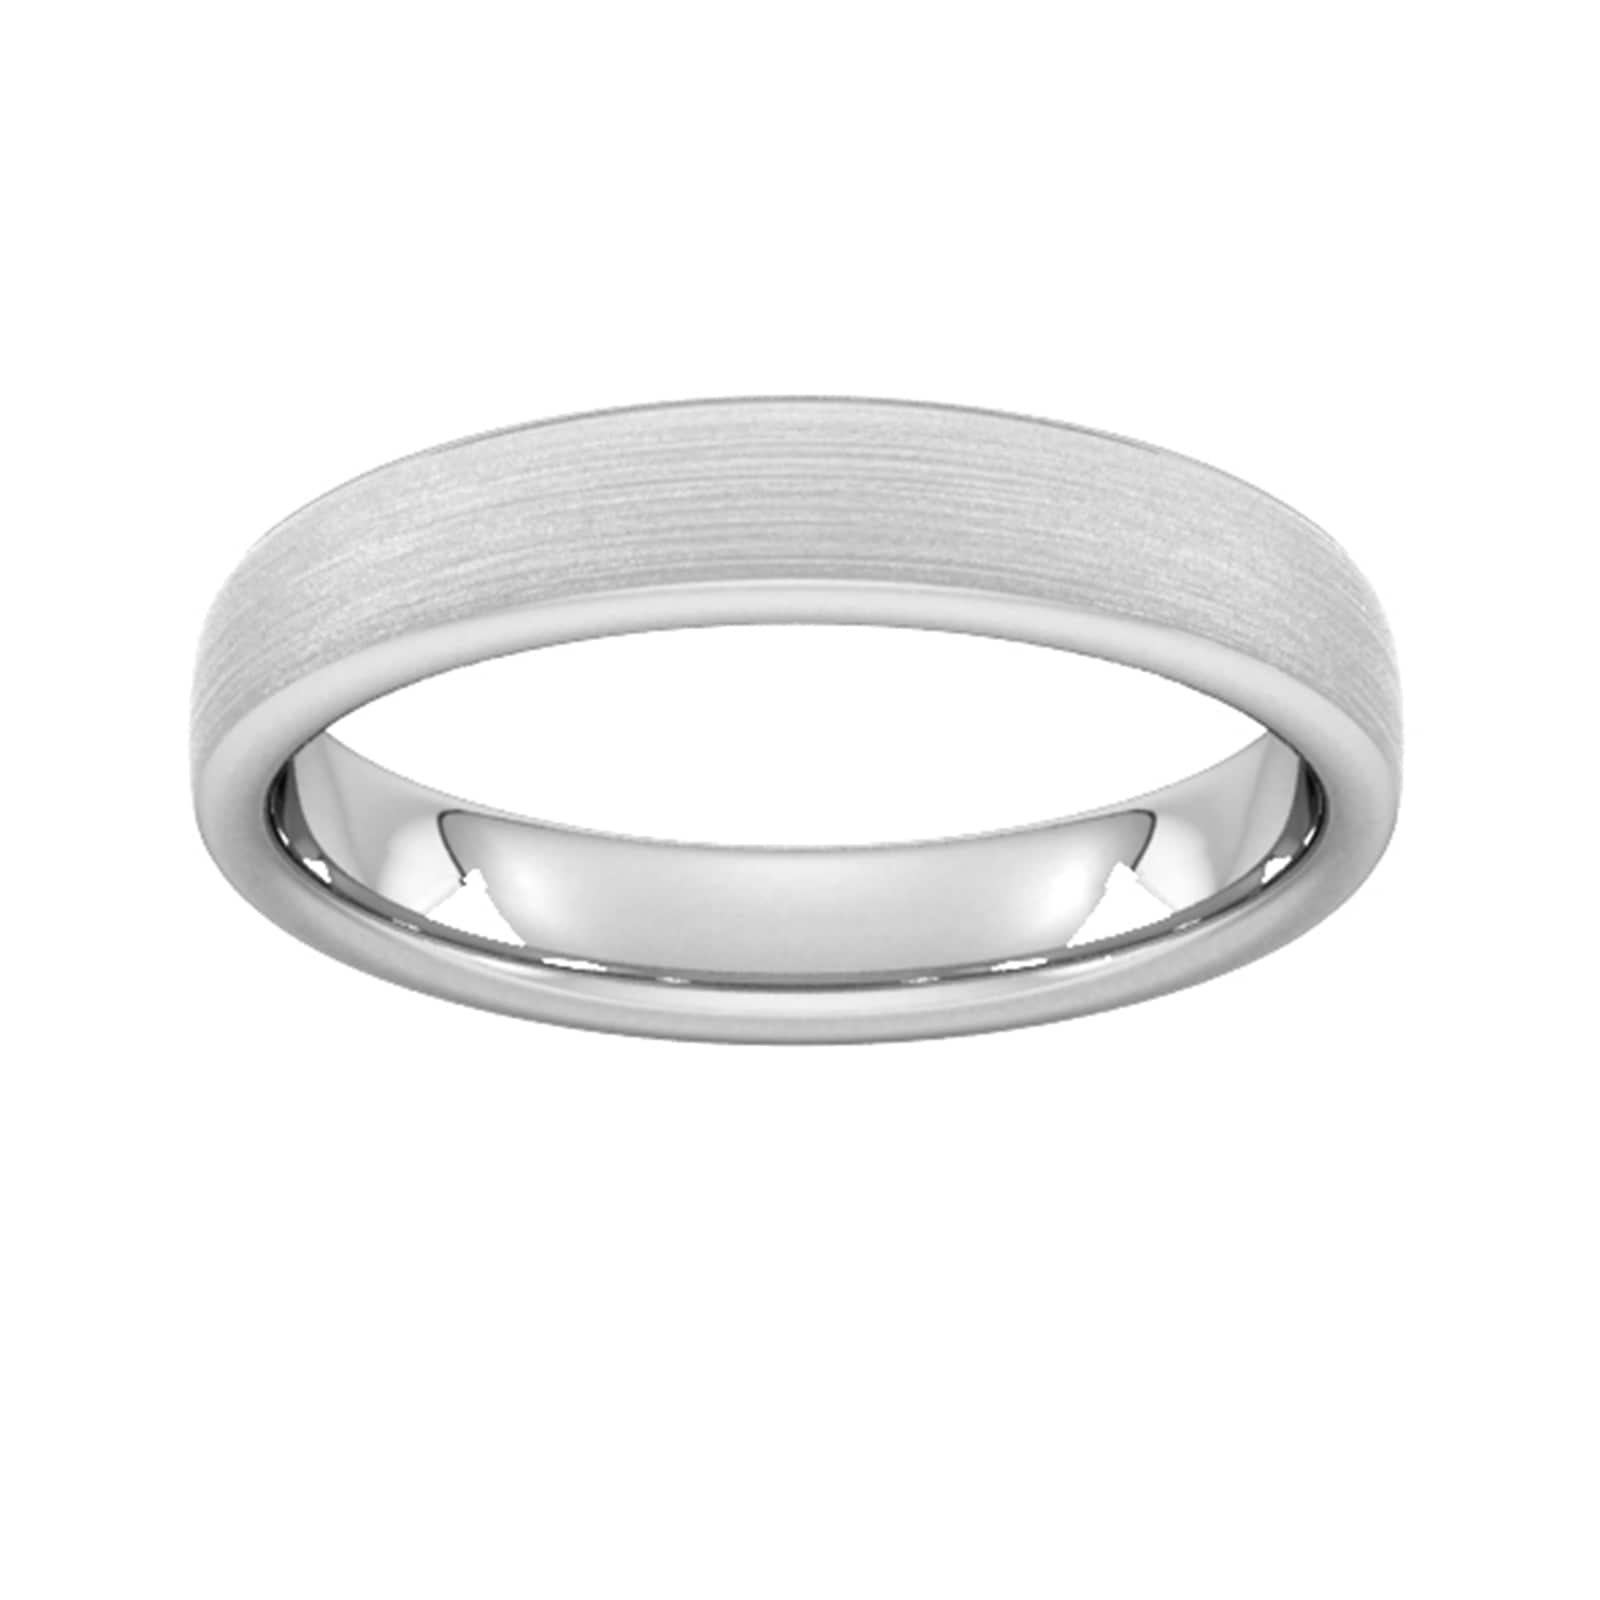 4mm Traditional Court Heavy Matt Finished Wedding Ring In 950 Palladium - Ring Size N